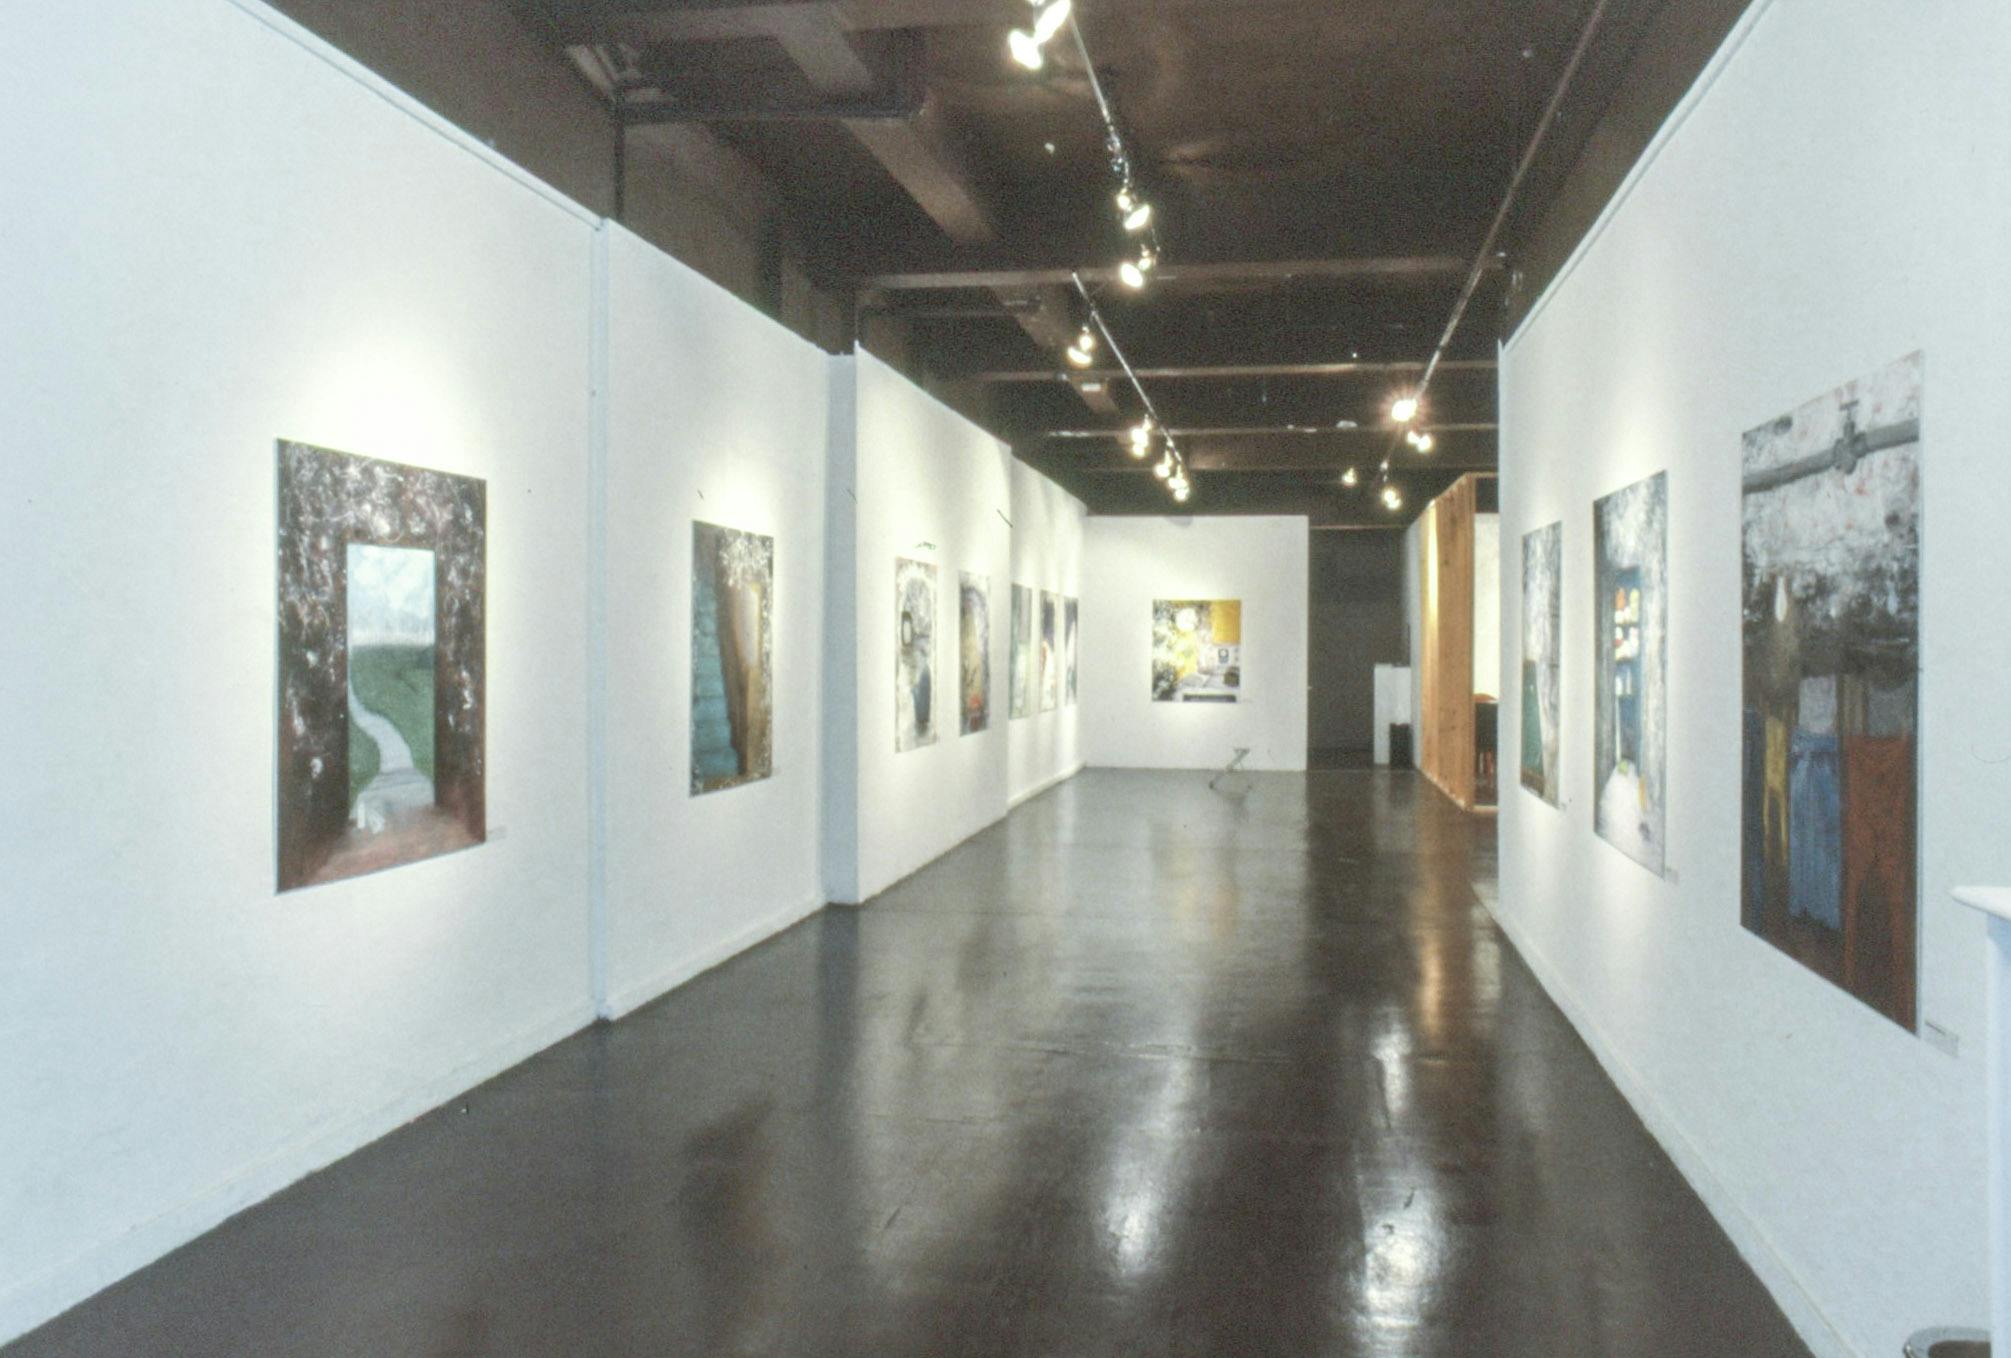 Several paintings on paper line the walls of a gallery. They depict different scenes and landscapes including a clothesline, an entryway with the view of a hill, a stairway, and a supply closet.